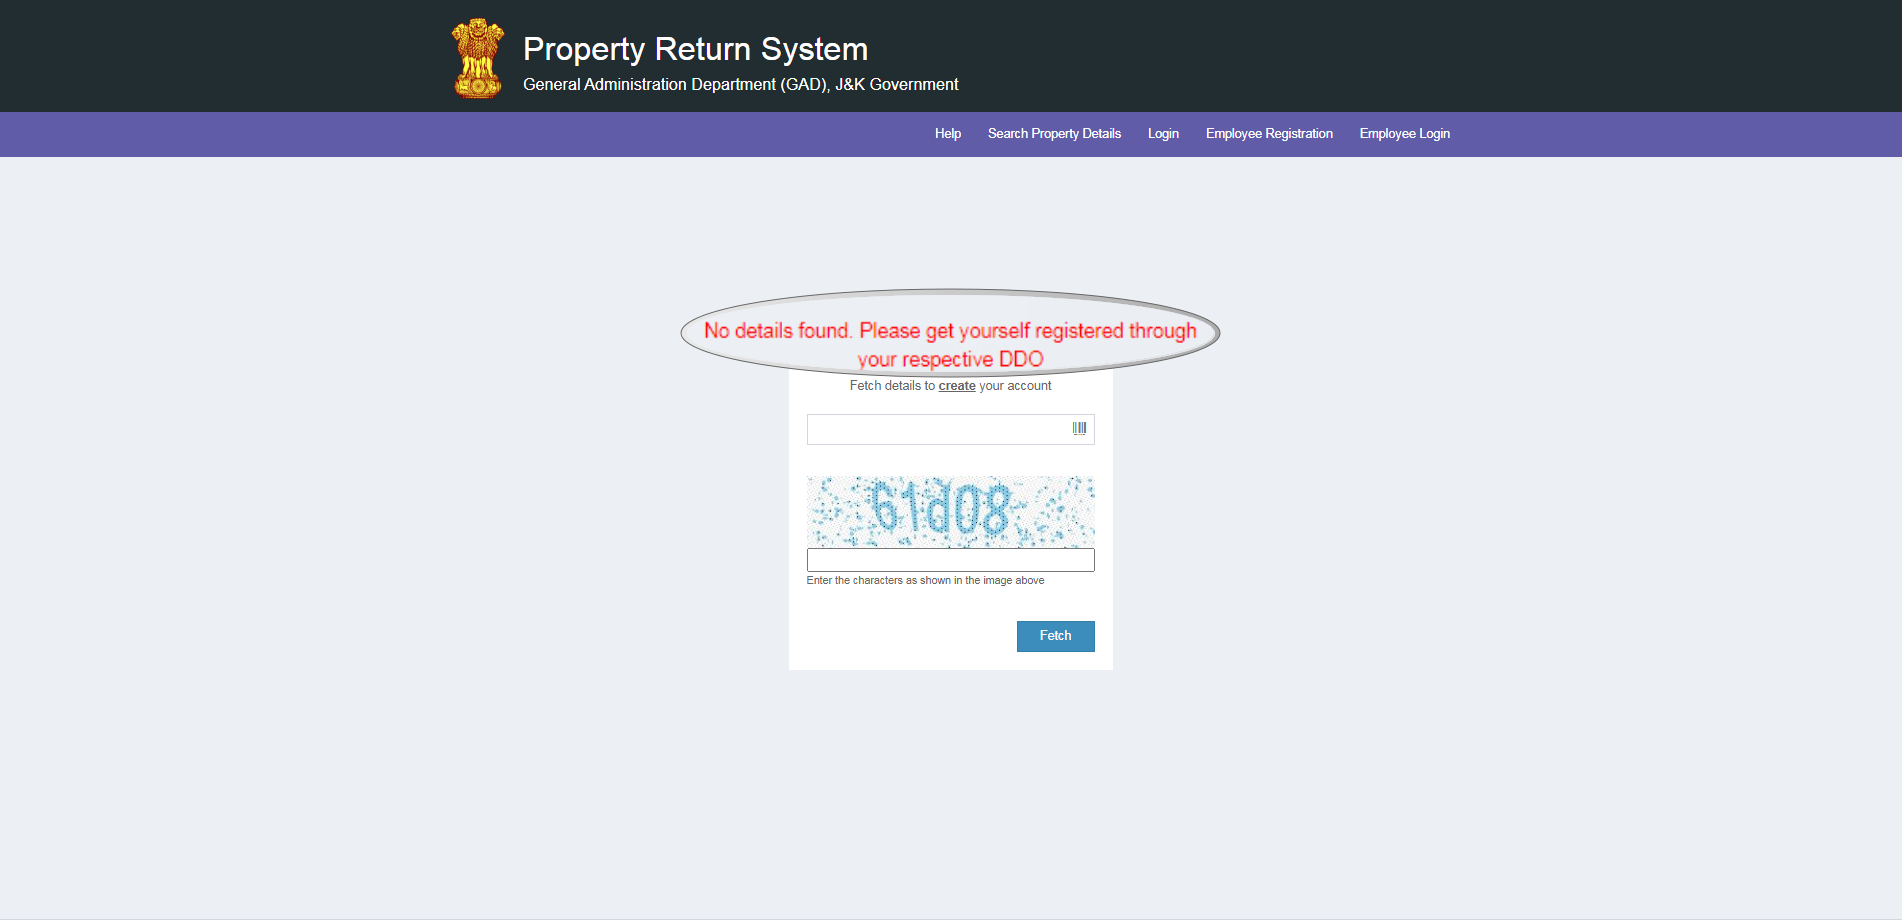 cpis-number-not-shown-Employee Registration. Property Return System.